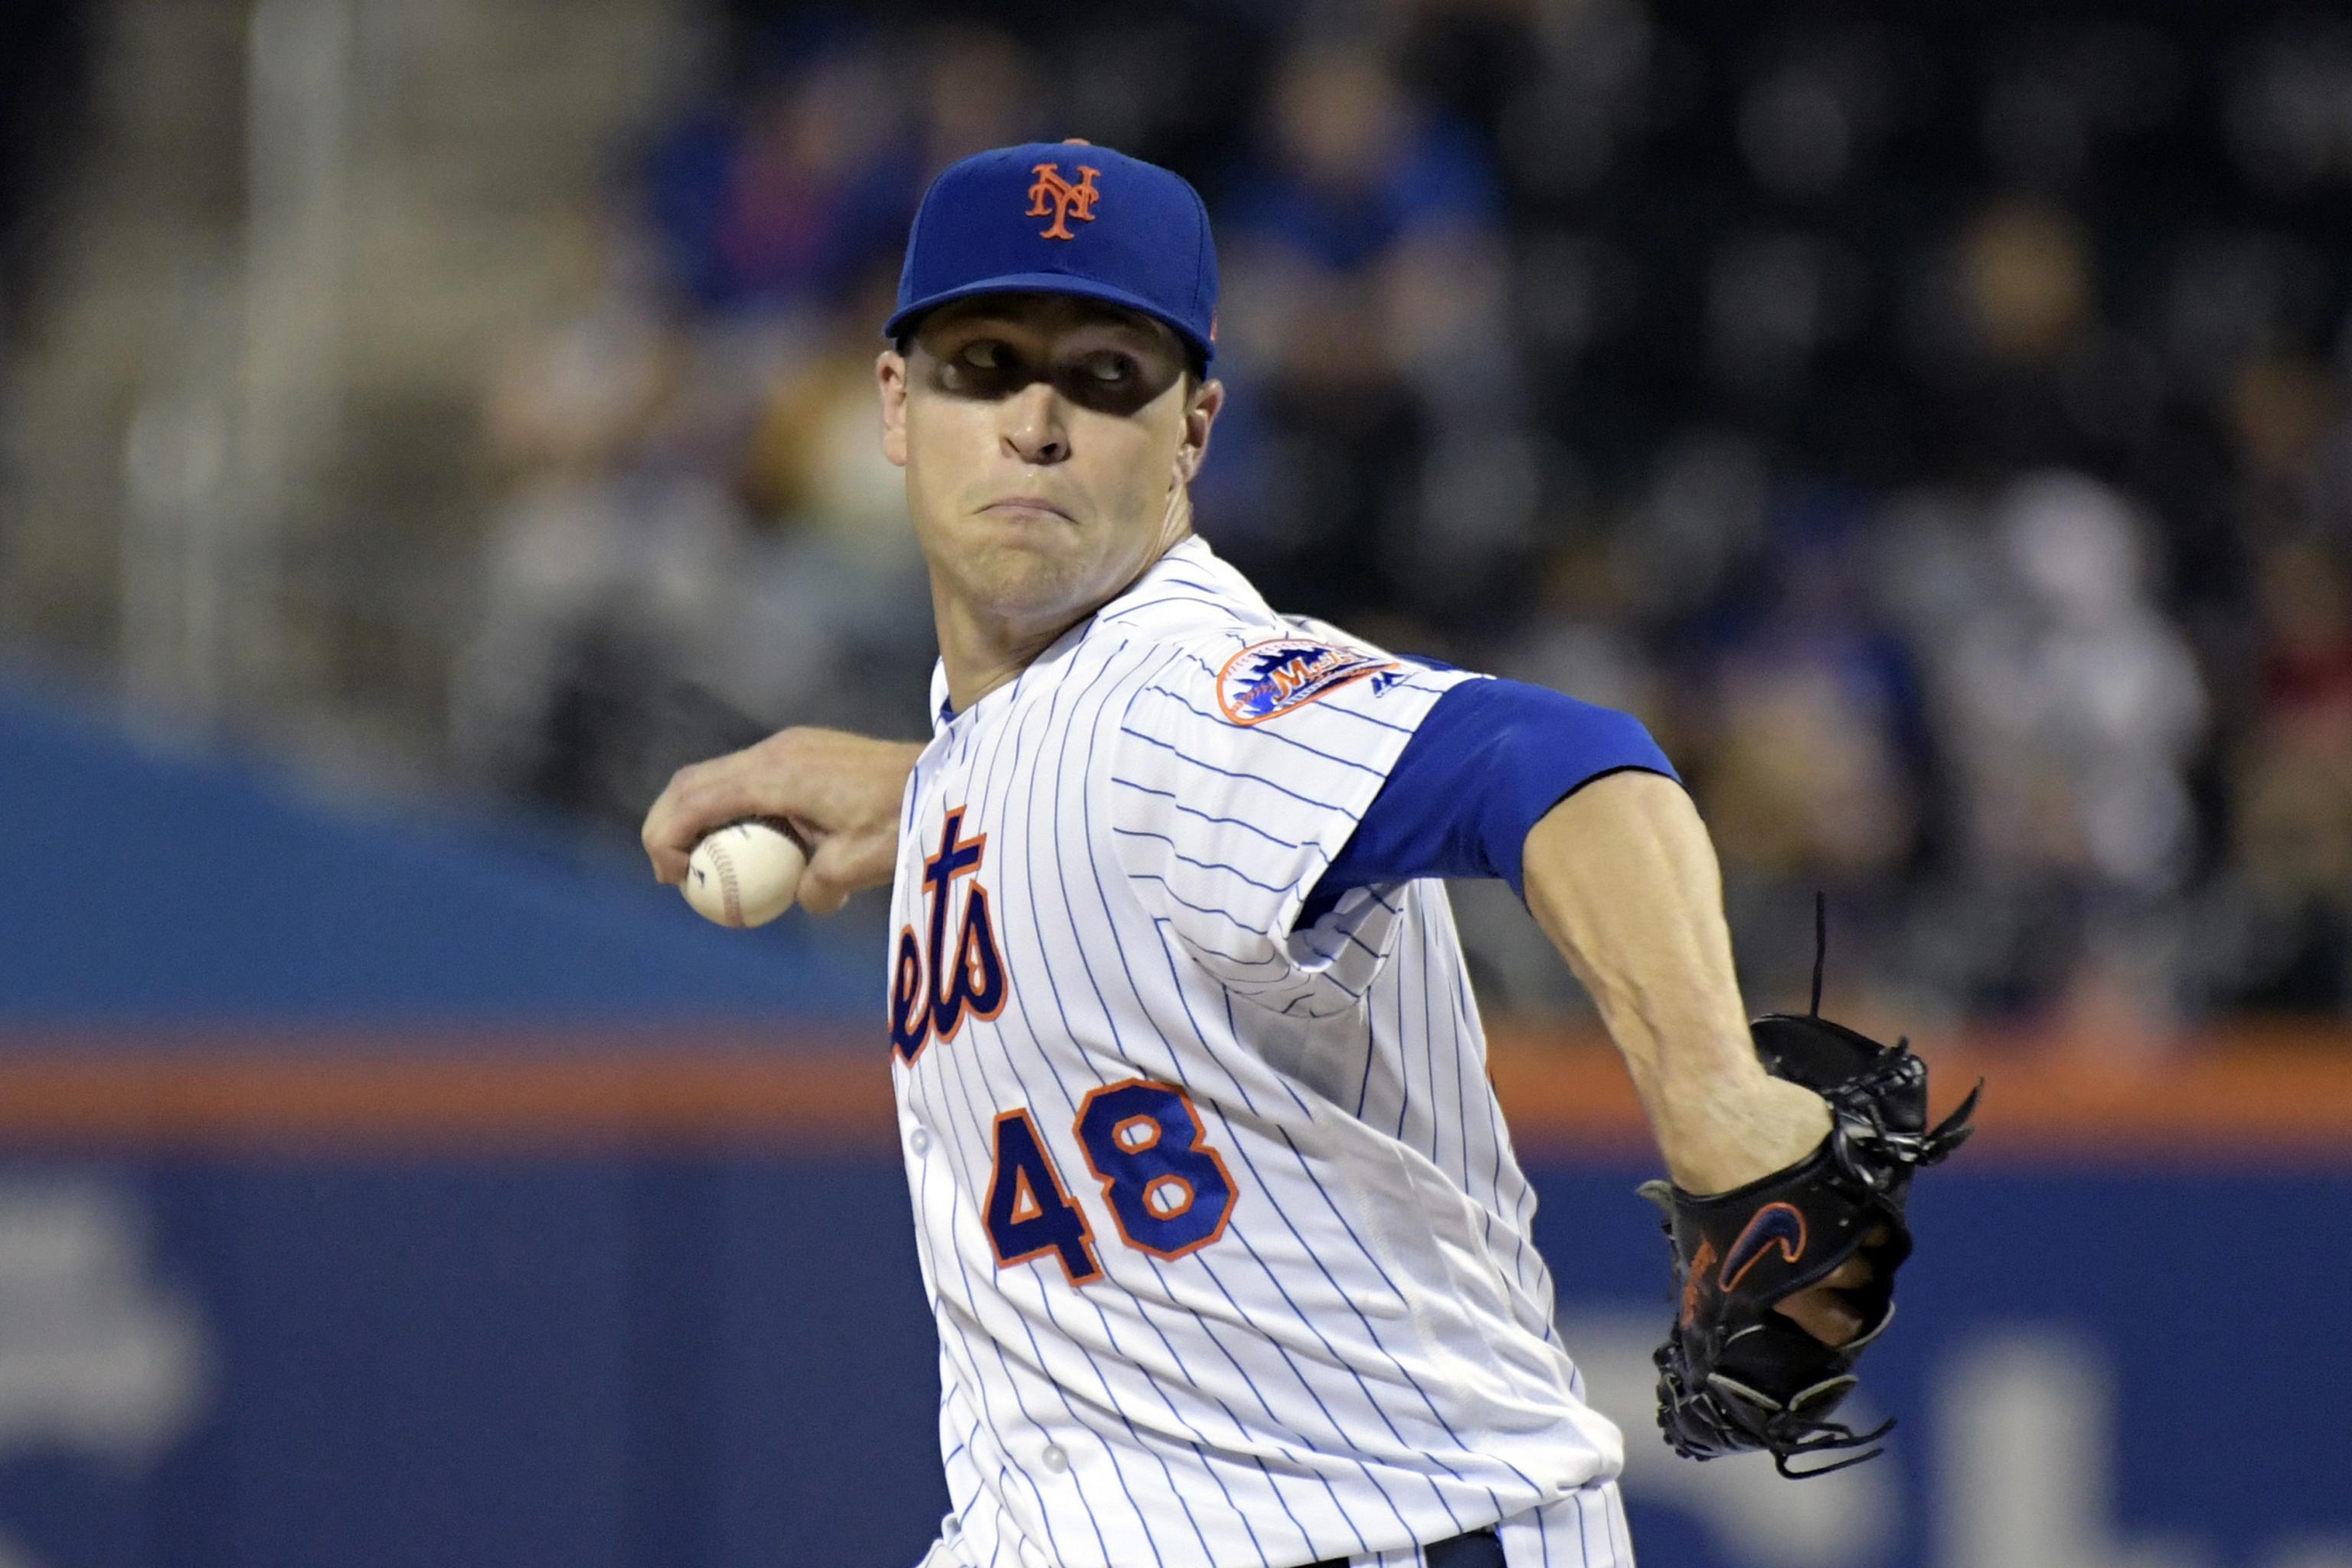 Mets pitcher Jacob deGrom wins National League Rookie of the Year